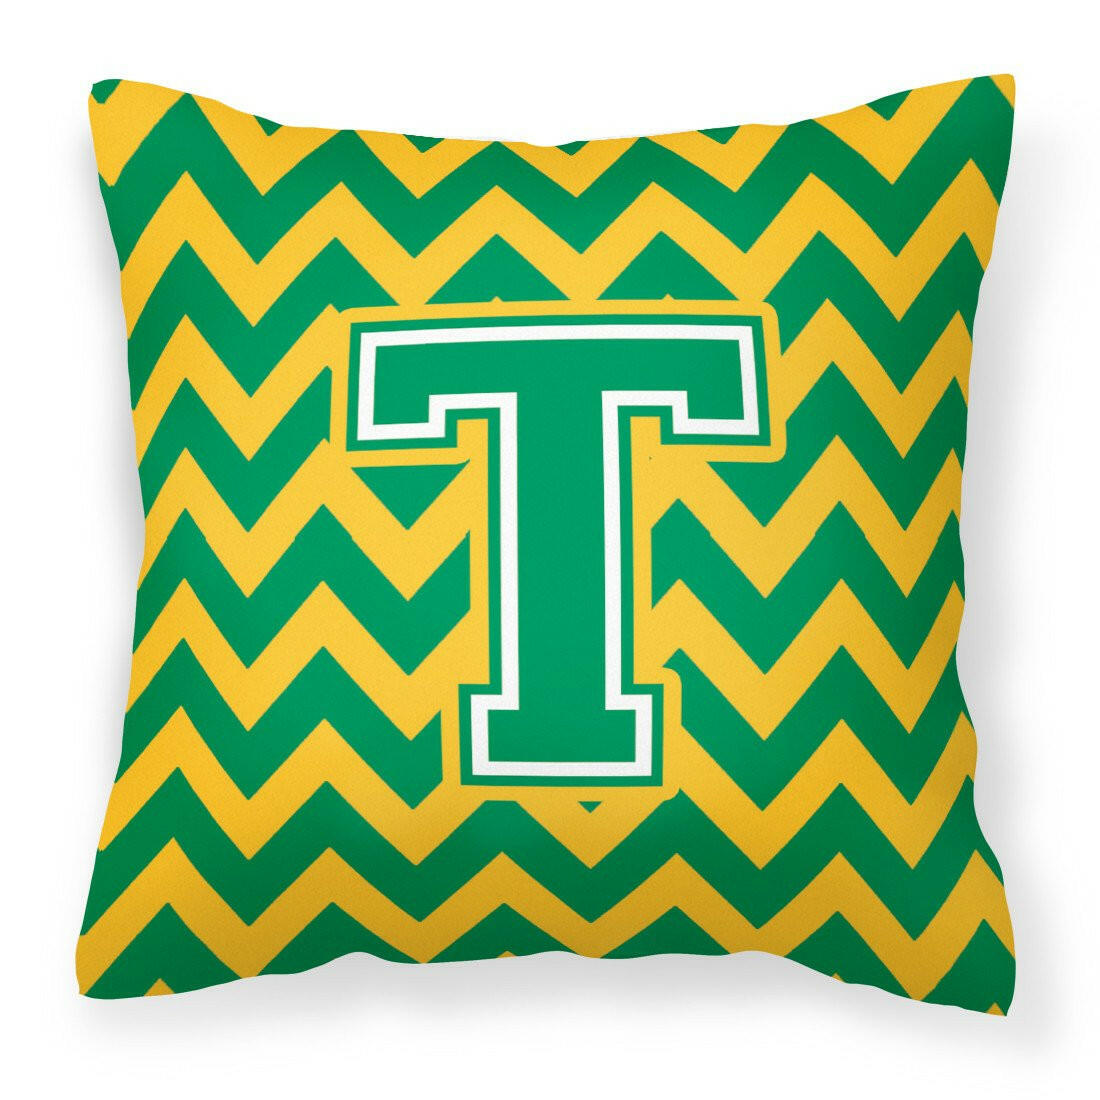 Letter T Chevron Green and Gold Fabric Decorative Pillow CJ1059-TPW1414 by Caroline's Treasures